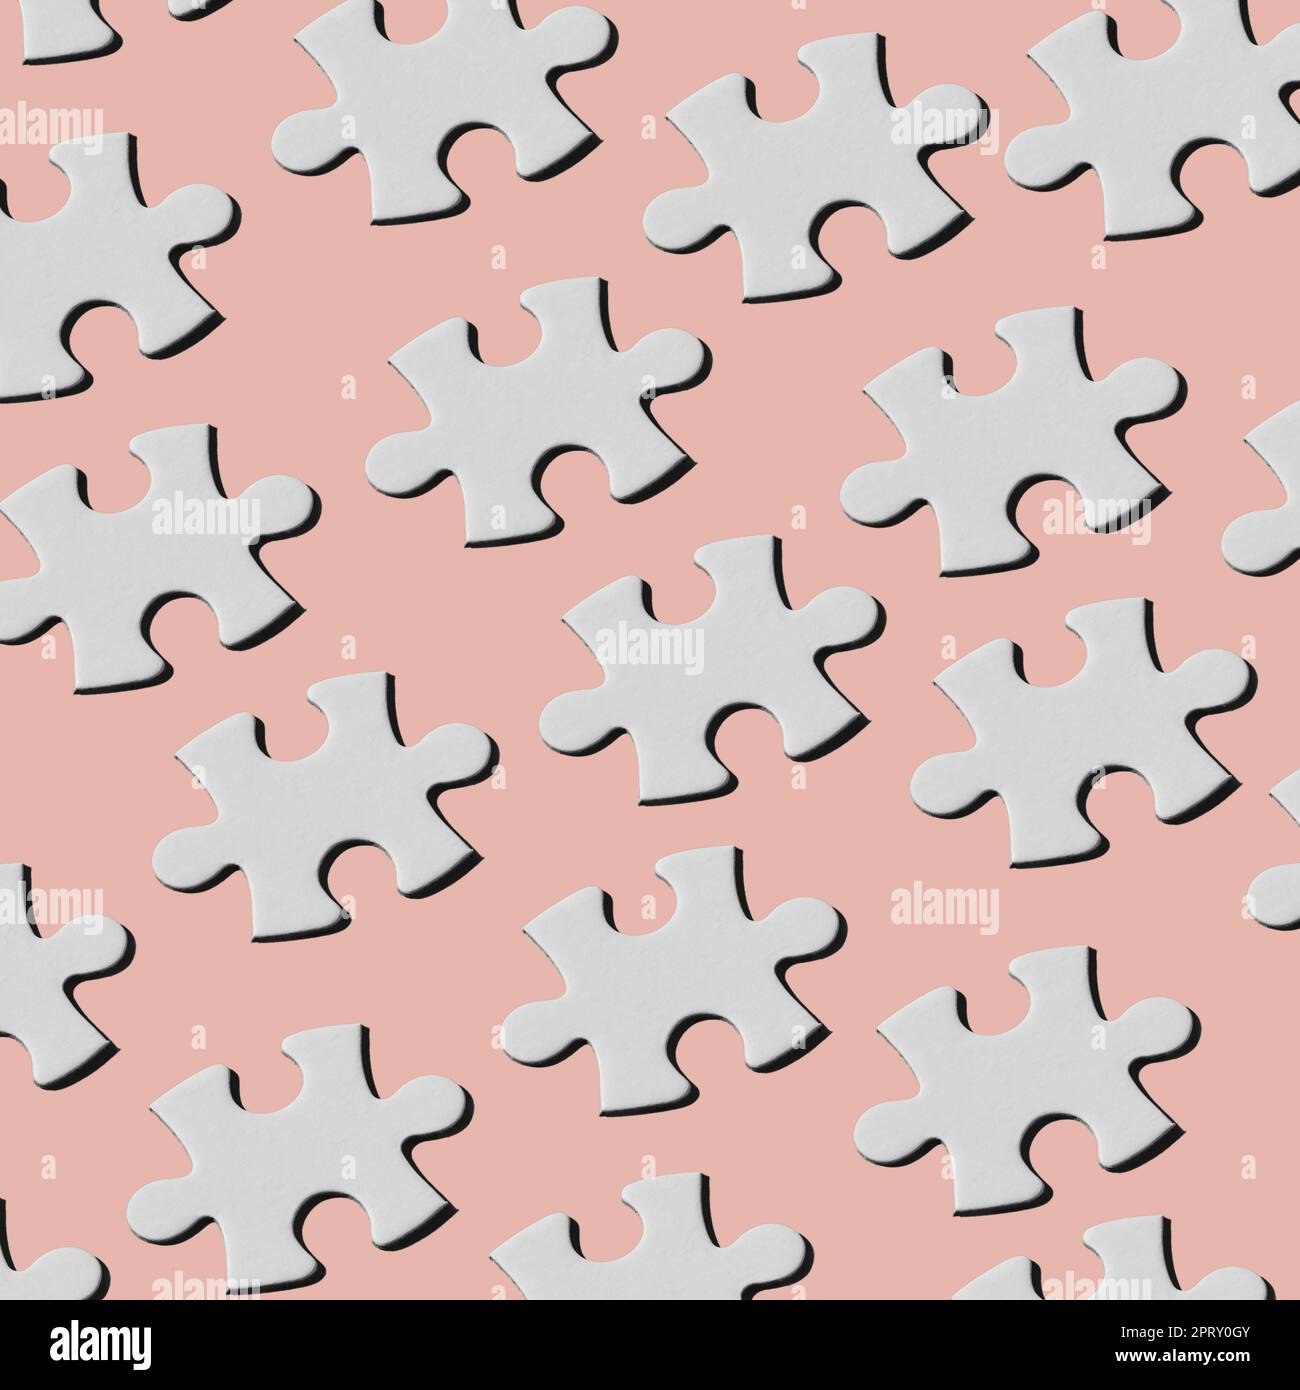 a pattern of white puzzle pieces arranged in different lines on a pale pink background Stock Photo